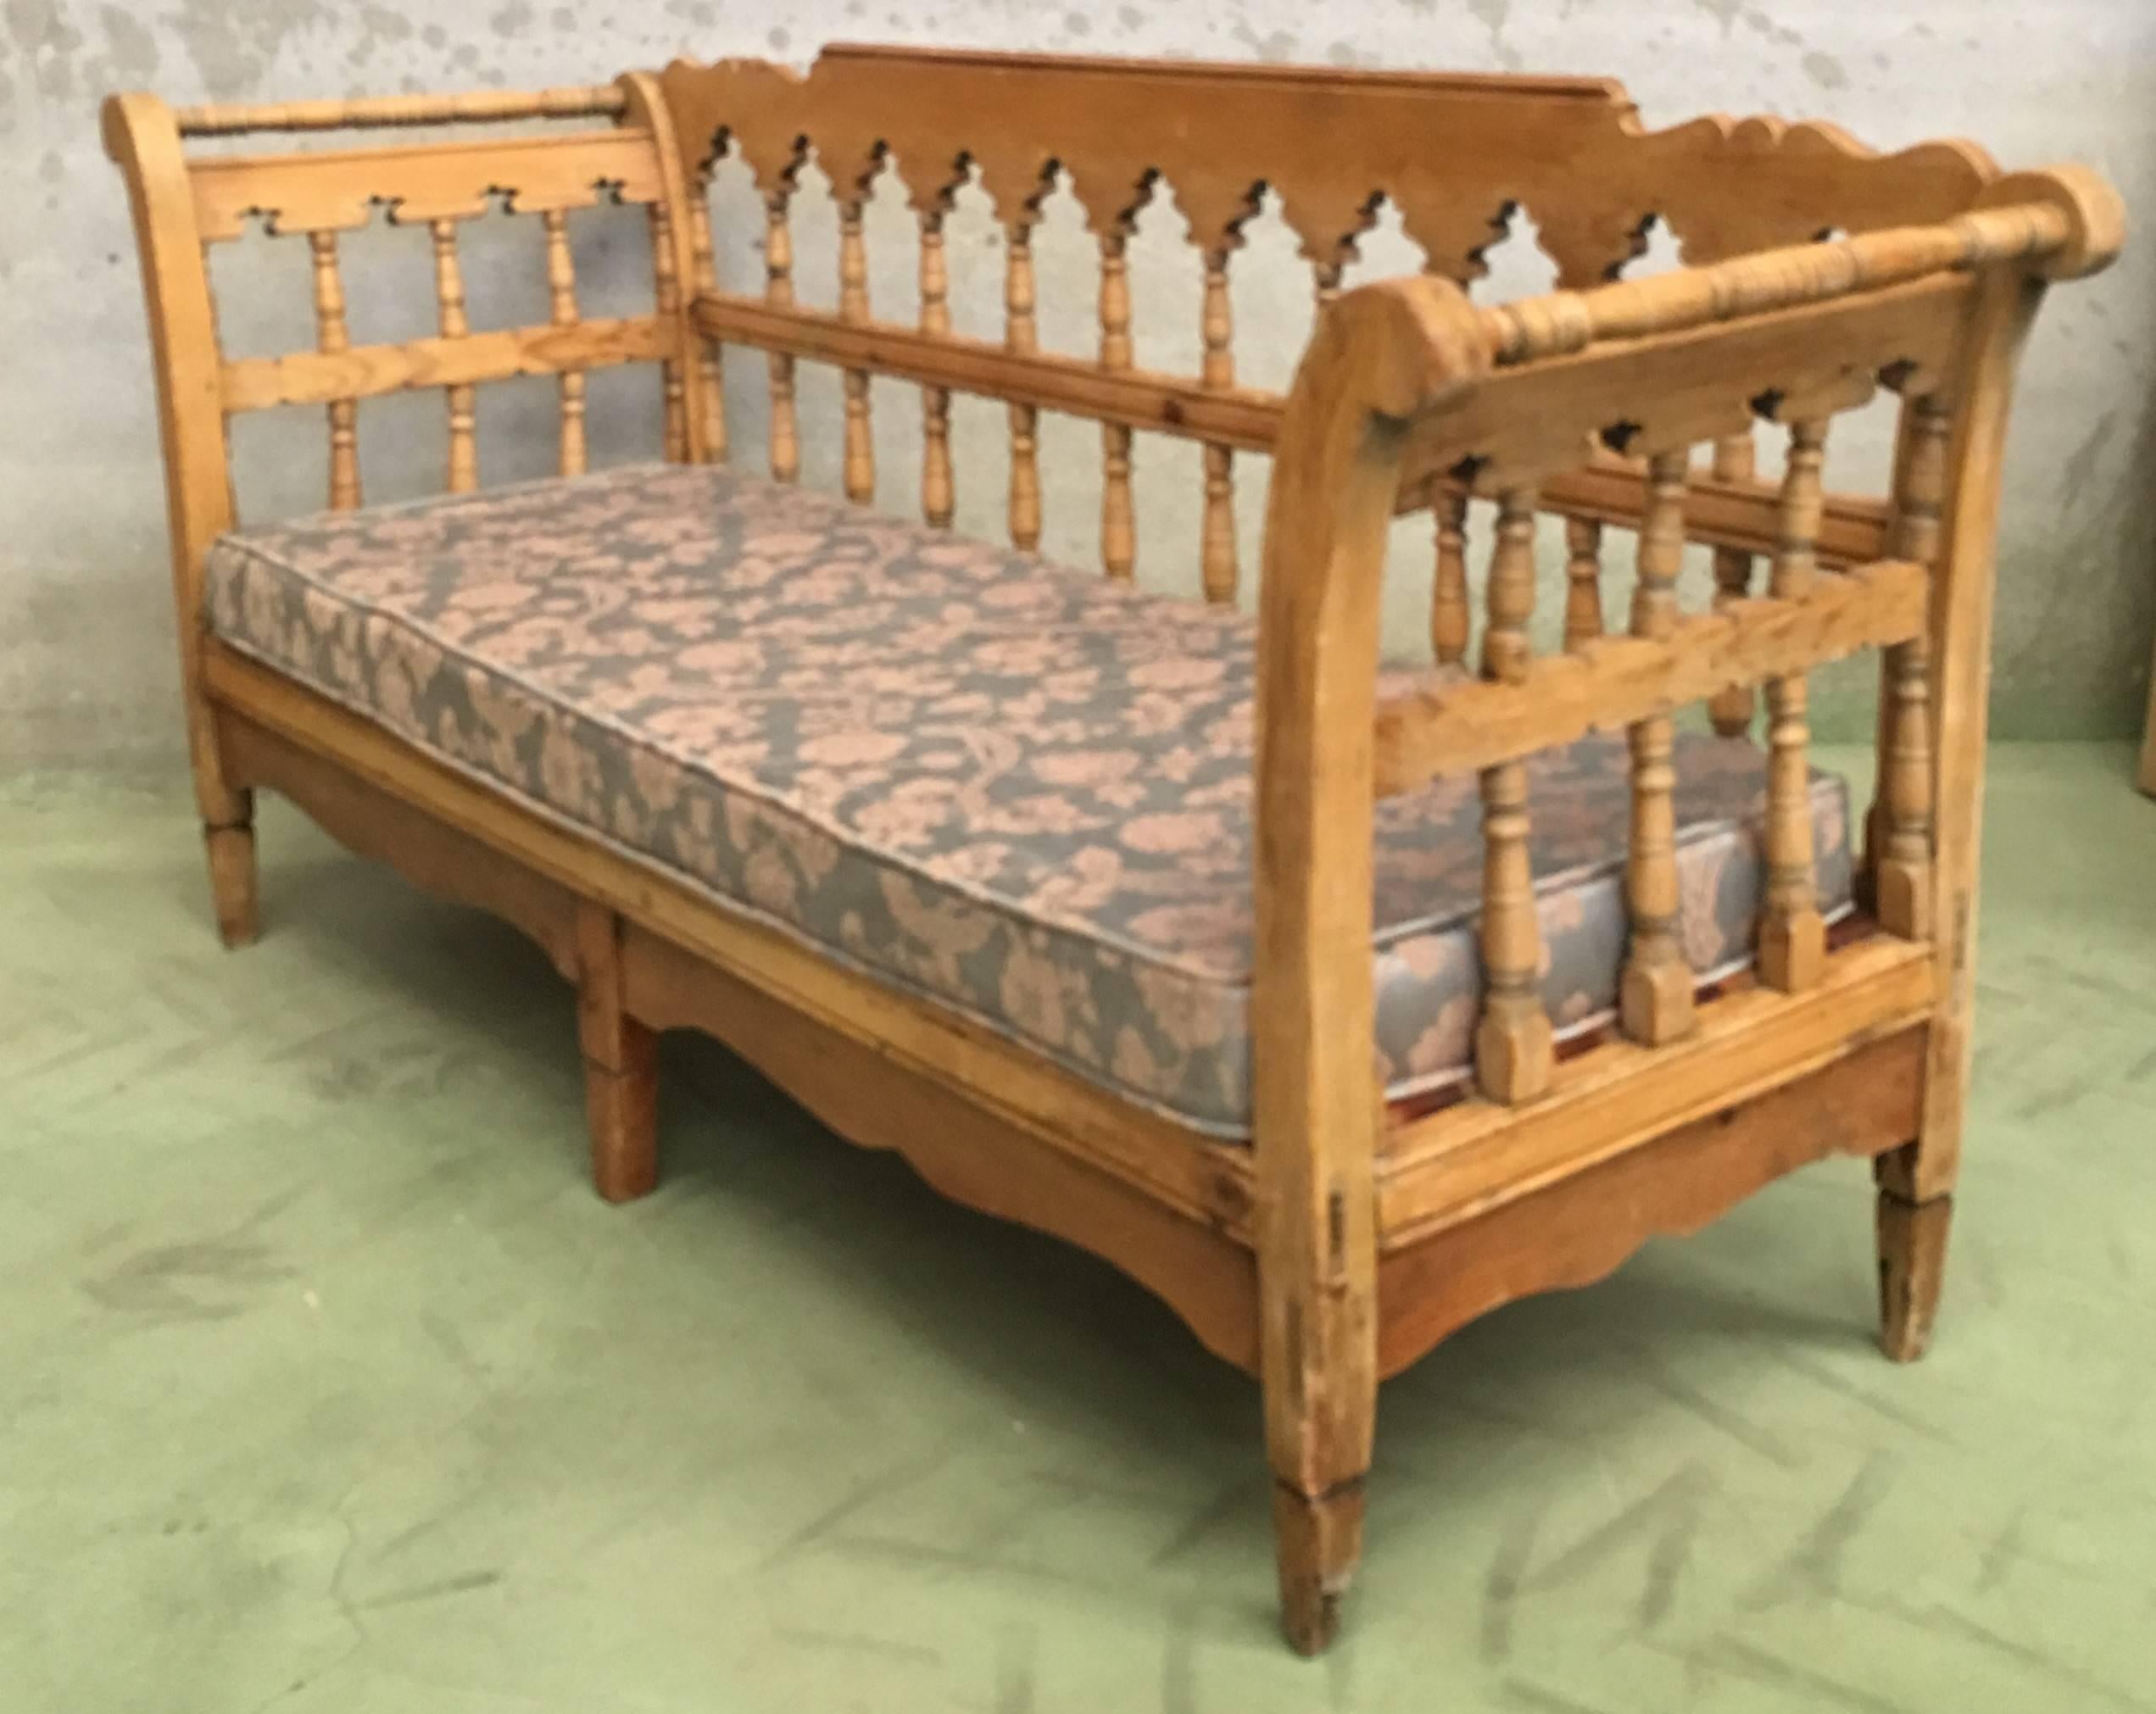 Large rustic Swedish pine bench / daybed, circa 1850.
Very heavy item.
Ideal for a summer house or garden room.
 